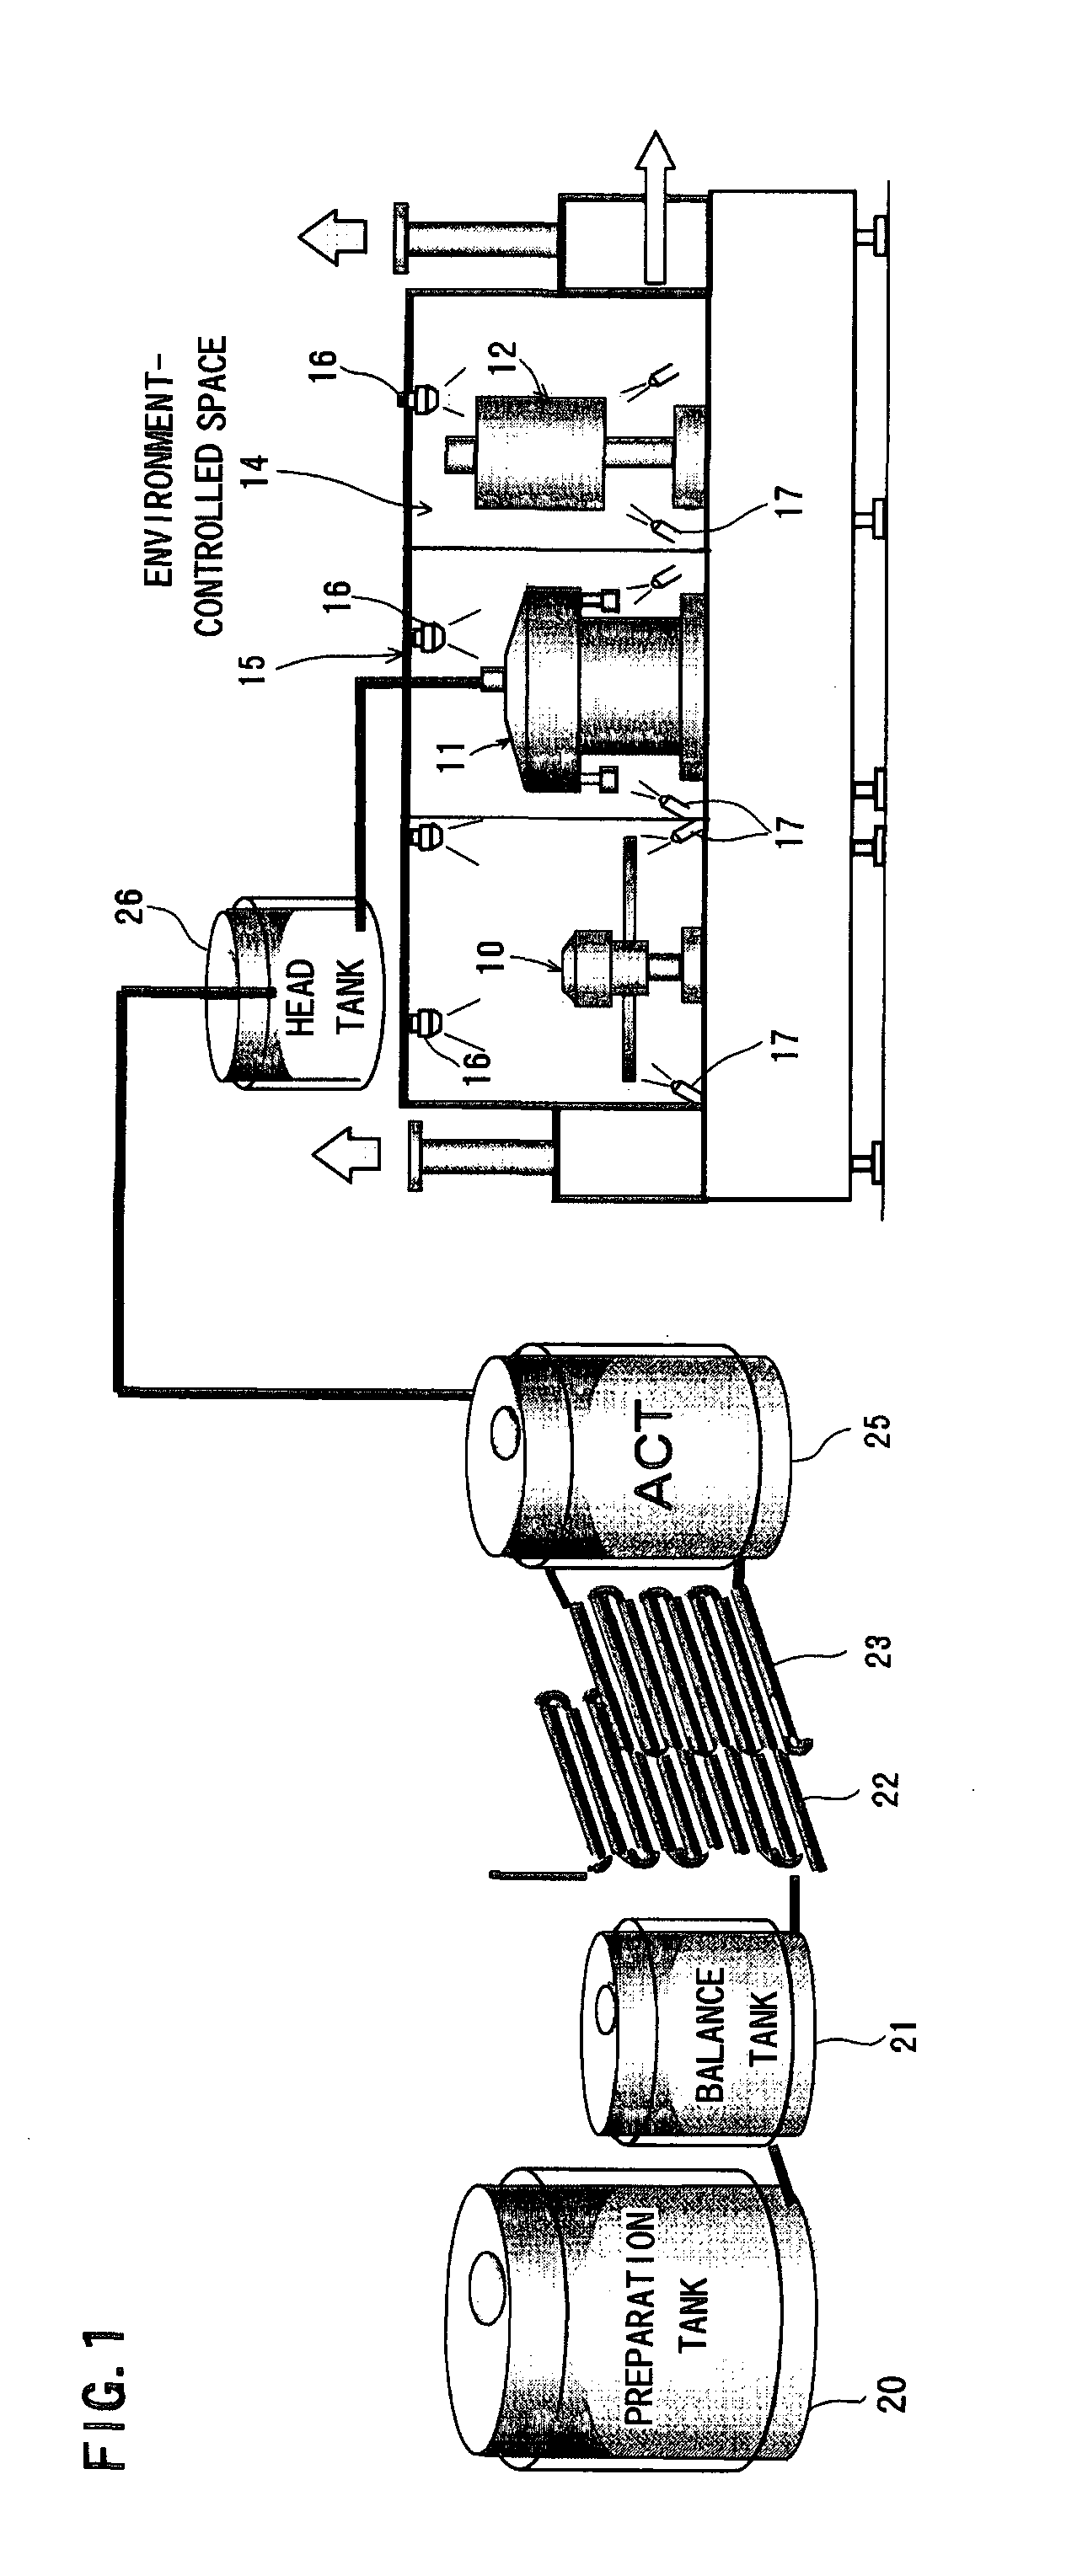 Method for producing packaged drink